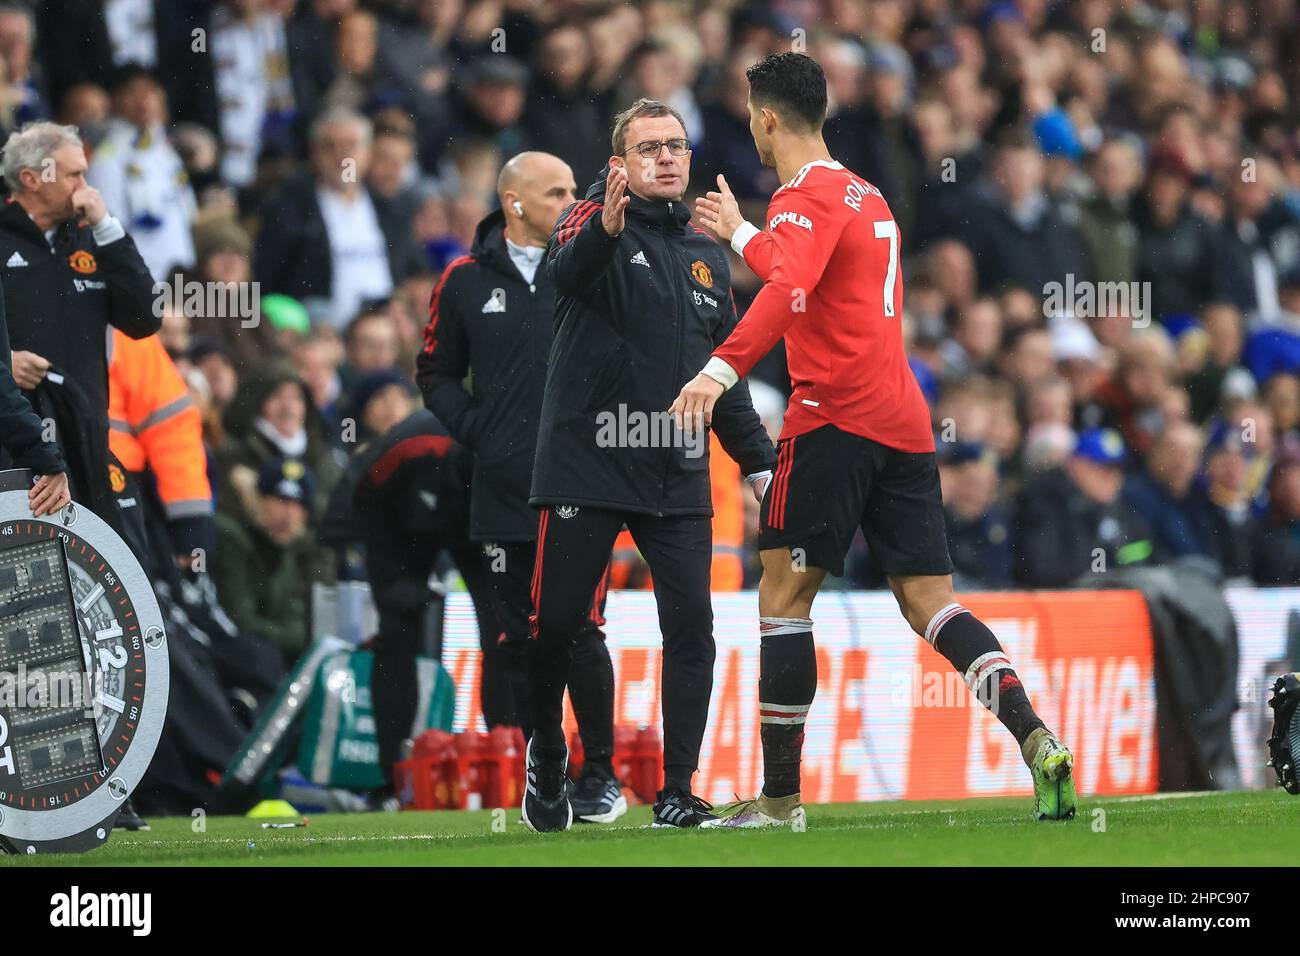 Ralf Rangnick manager of Manchester United shakes hands with Cristiano Ronaldo #7 as he comes off the field in ,  on 2/20/2022. (Photo by Mark Cosgrove/News Images/Sipa USA) Stock Photo